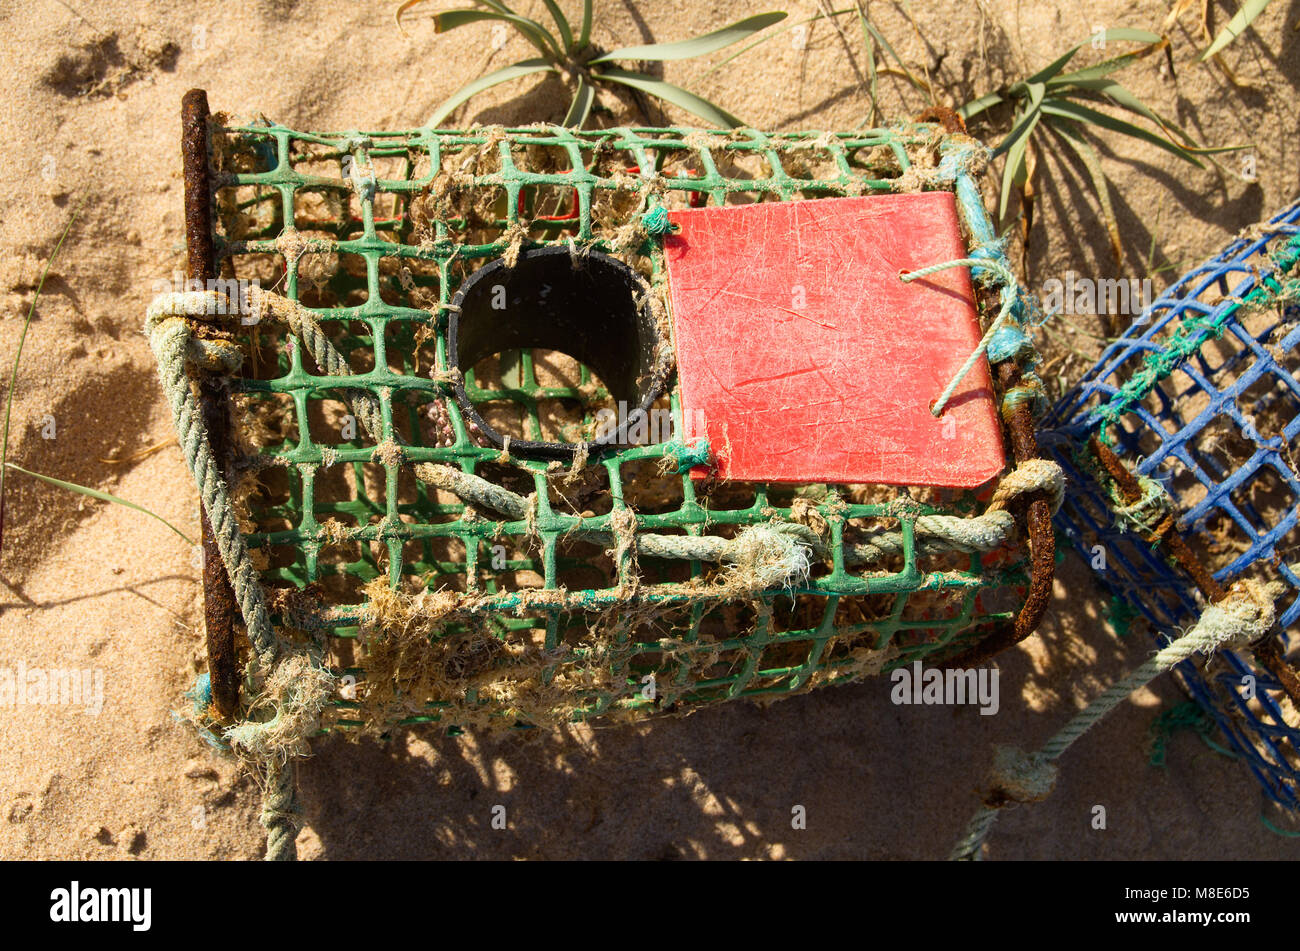 Close up of an old and worn-out, artisanal, crab trap made of iron and colored plastic materials. Vila Nova de Milfontes, Portugal. Stock Photo